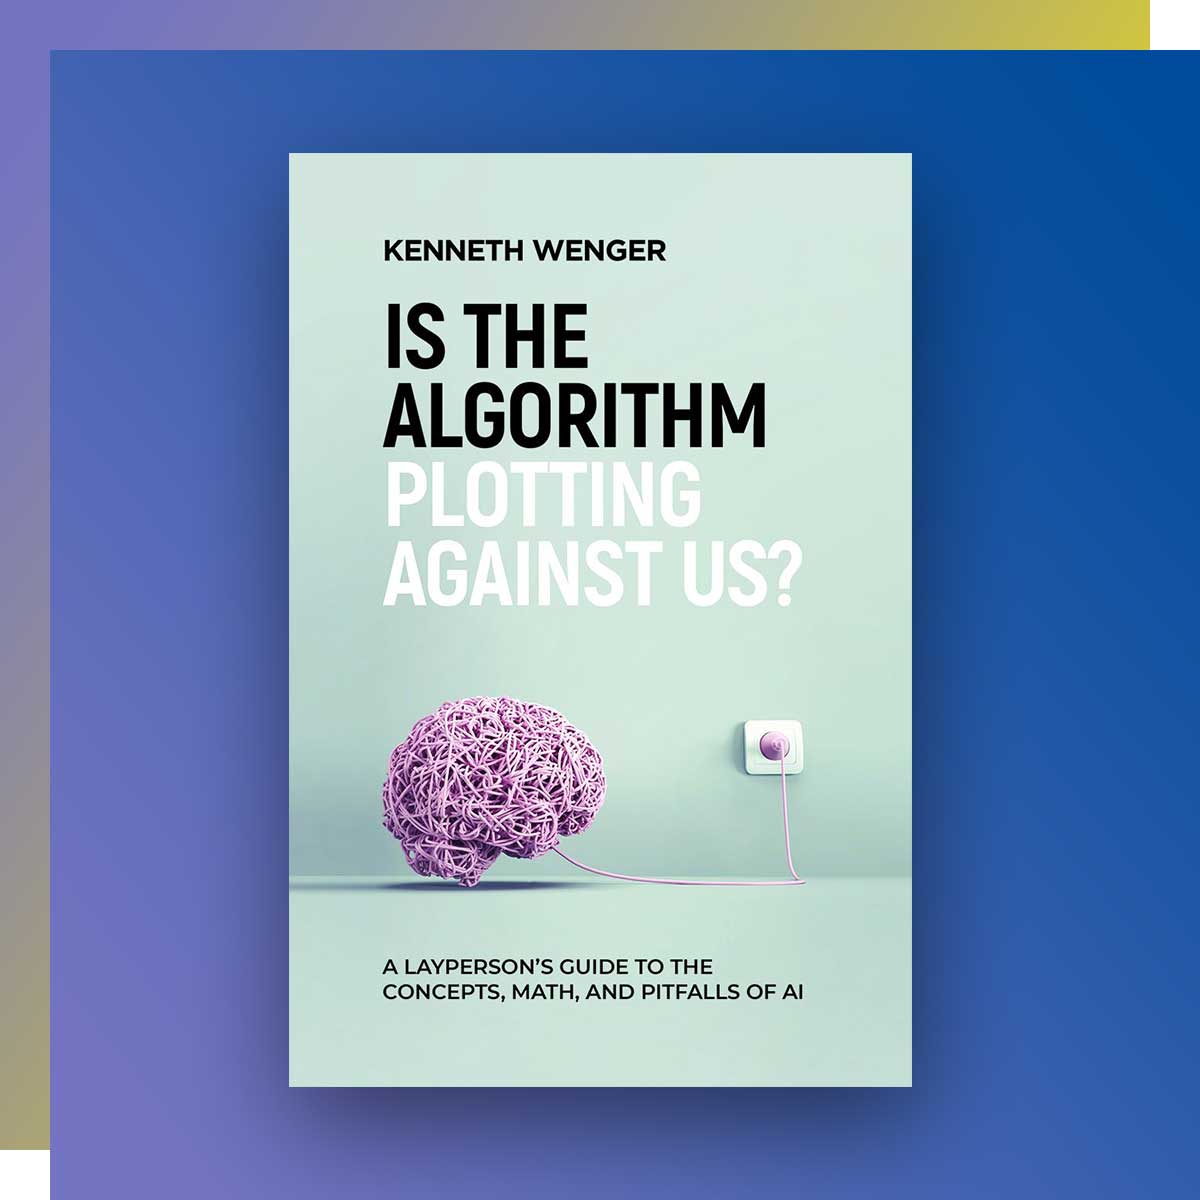 Is the Algorithm Plotting Against Us? by Kenneth Wenger